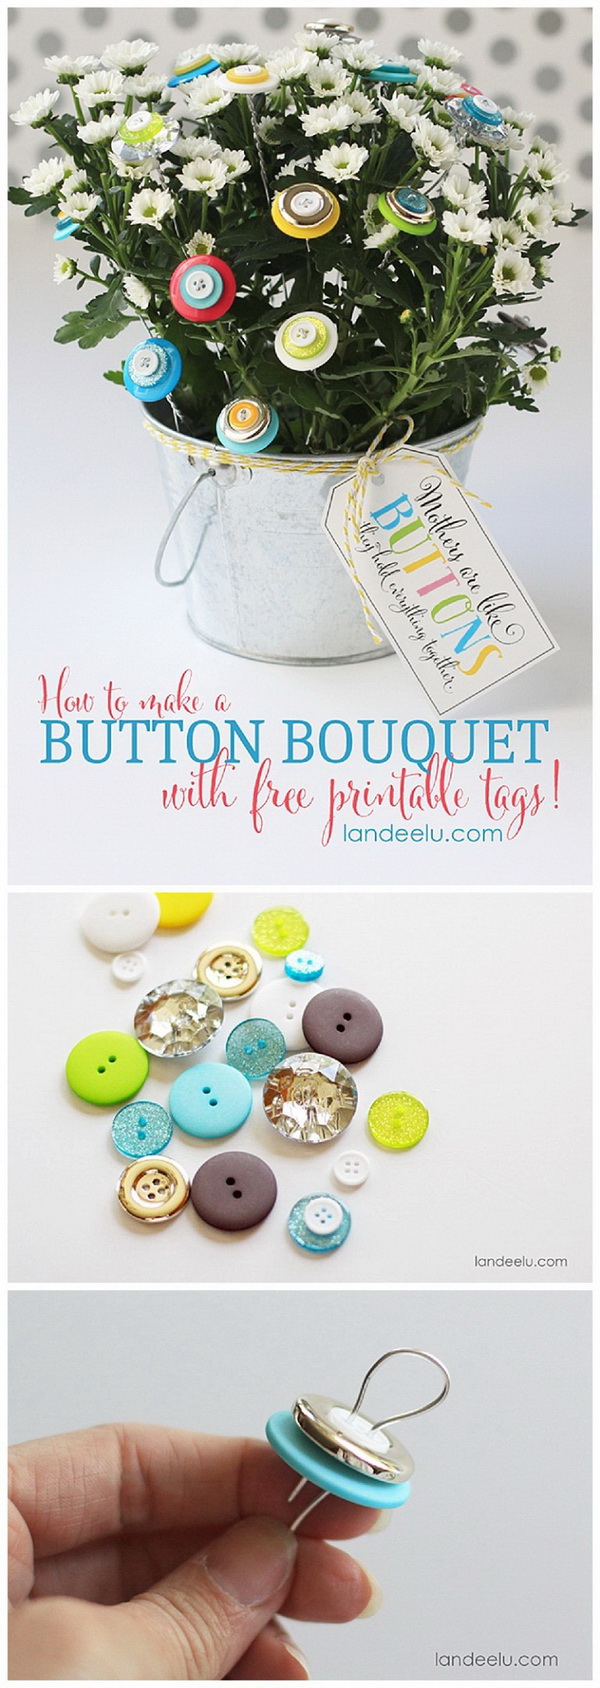 DIY Button Bouquet. Button bouquets are relatively easy and inexpensive to make yourself. Collect a selection of new and vintage buttons and start to make one of your own.  